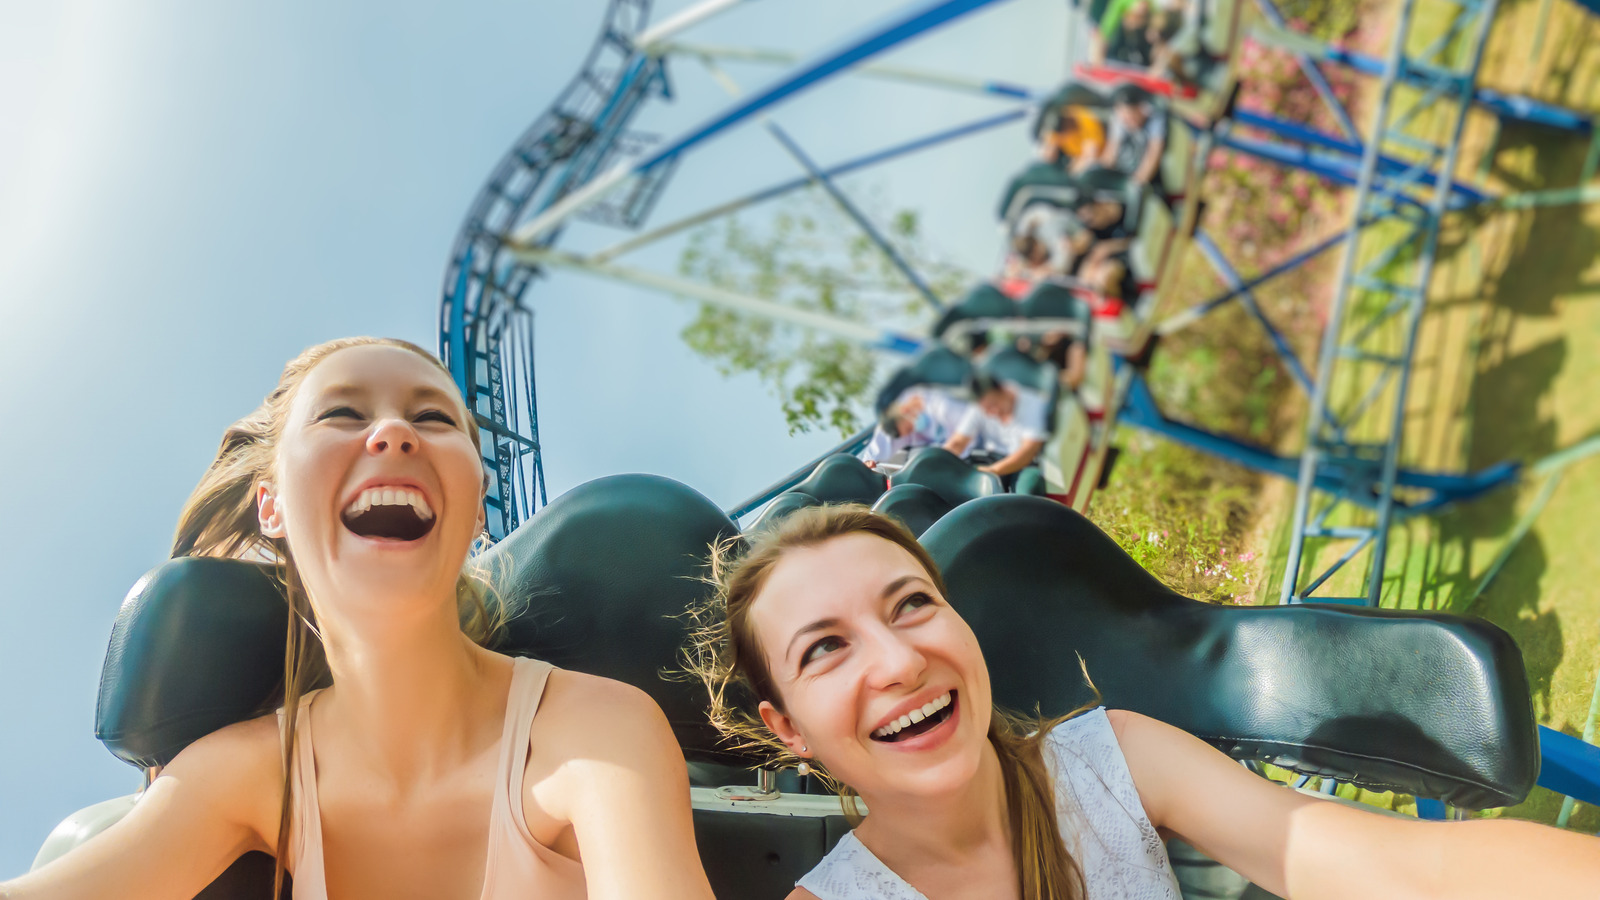 First-of-its-Kind New Rides to Open in Every SeaWorld Park in 2023  Including the World's First Surf Coaster, the Longest and Fastest Straddle  Coaster, and the World's First Launched Flume Coaster